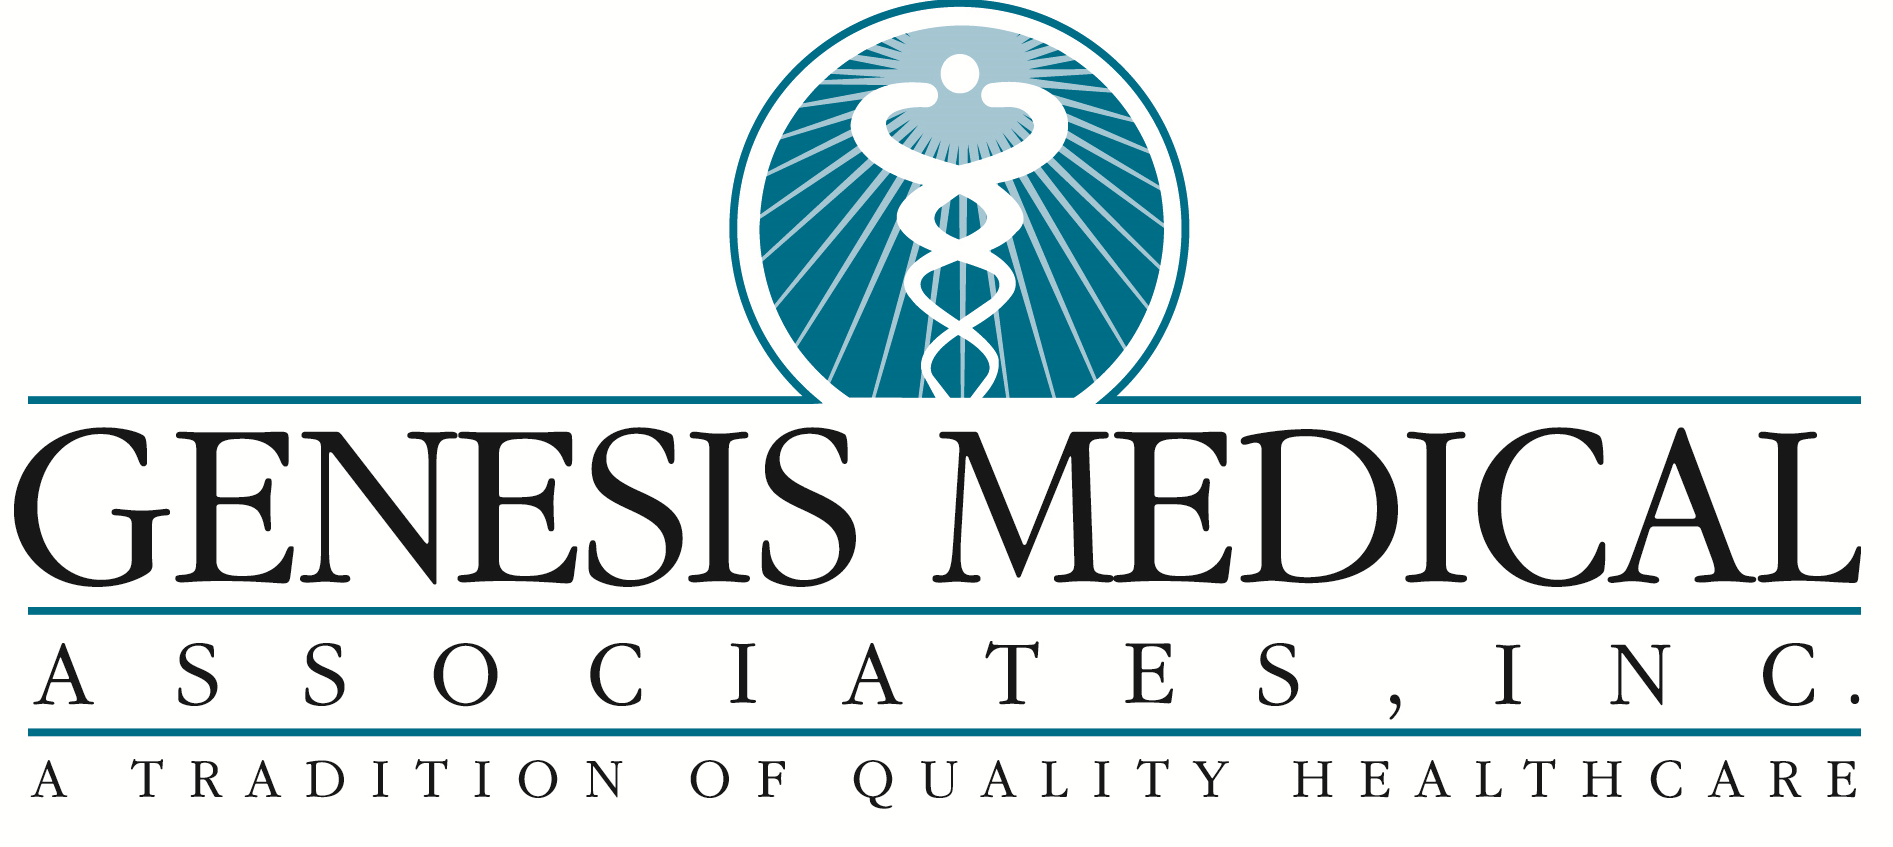 Genesis Health Care Logo - Genesis Medical Associates of PA resists buyout offers, cultivates ...